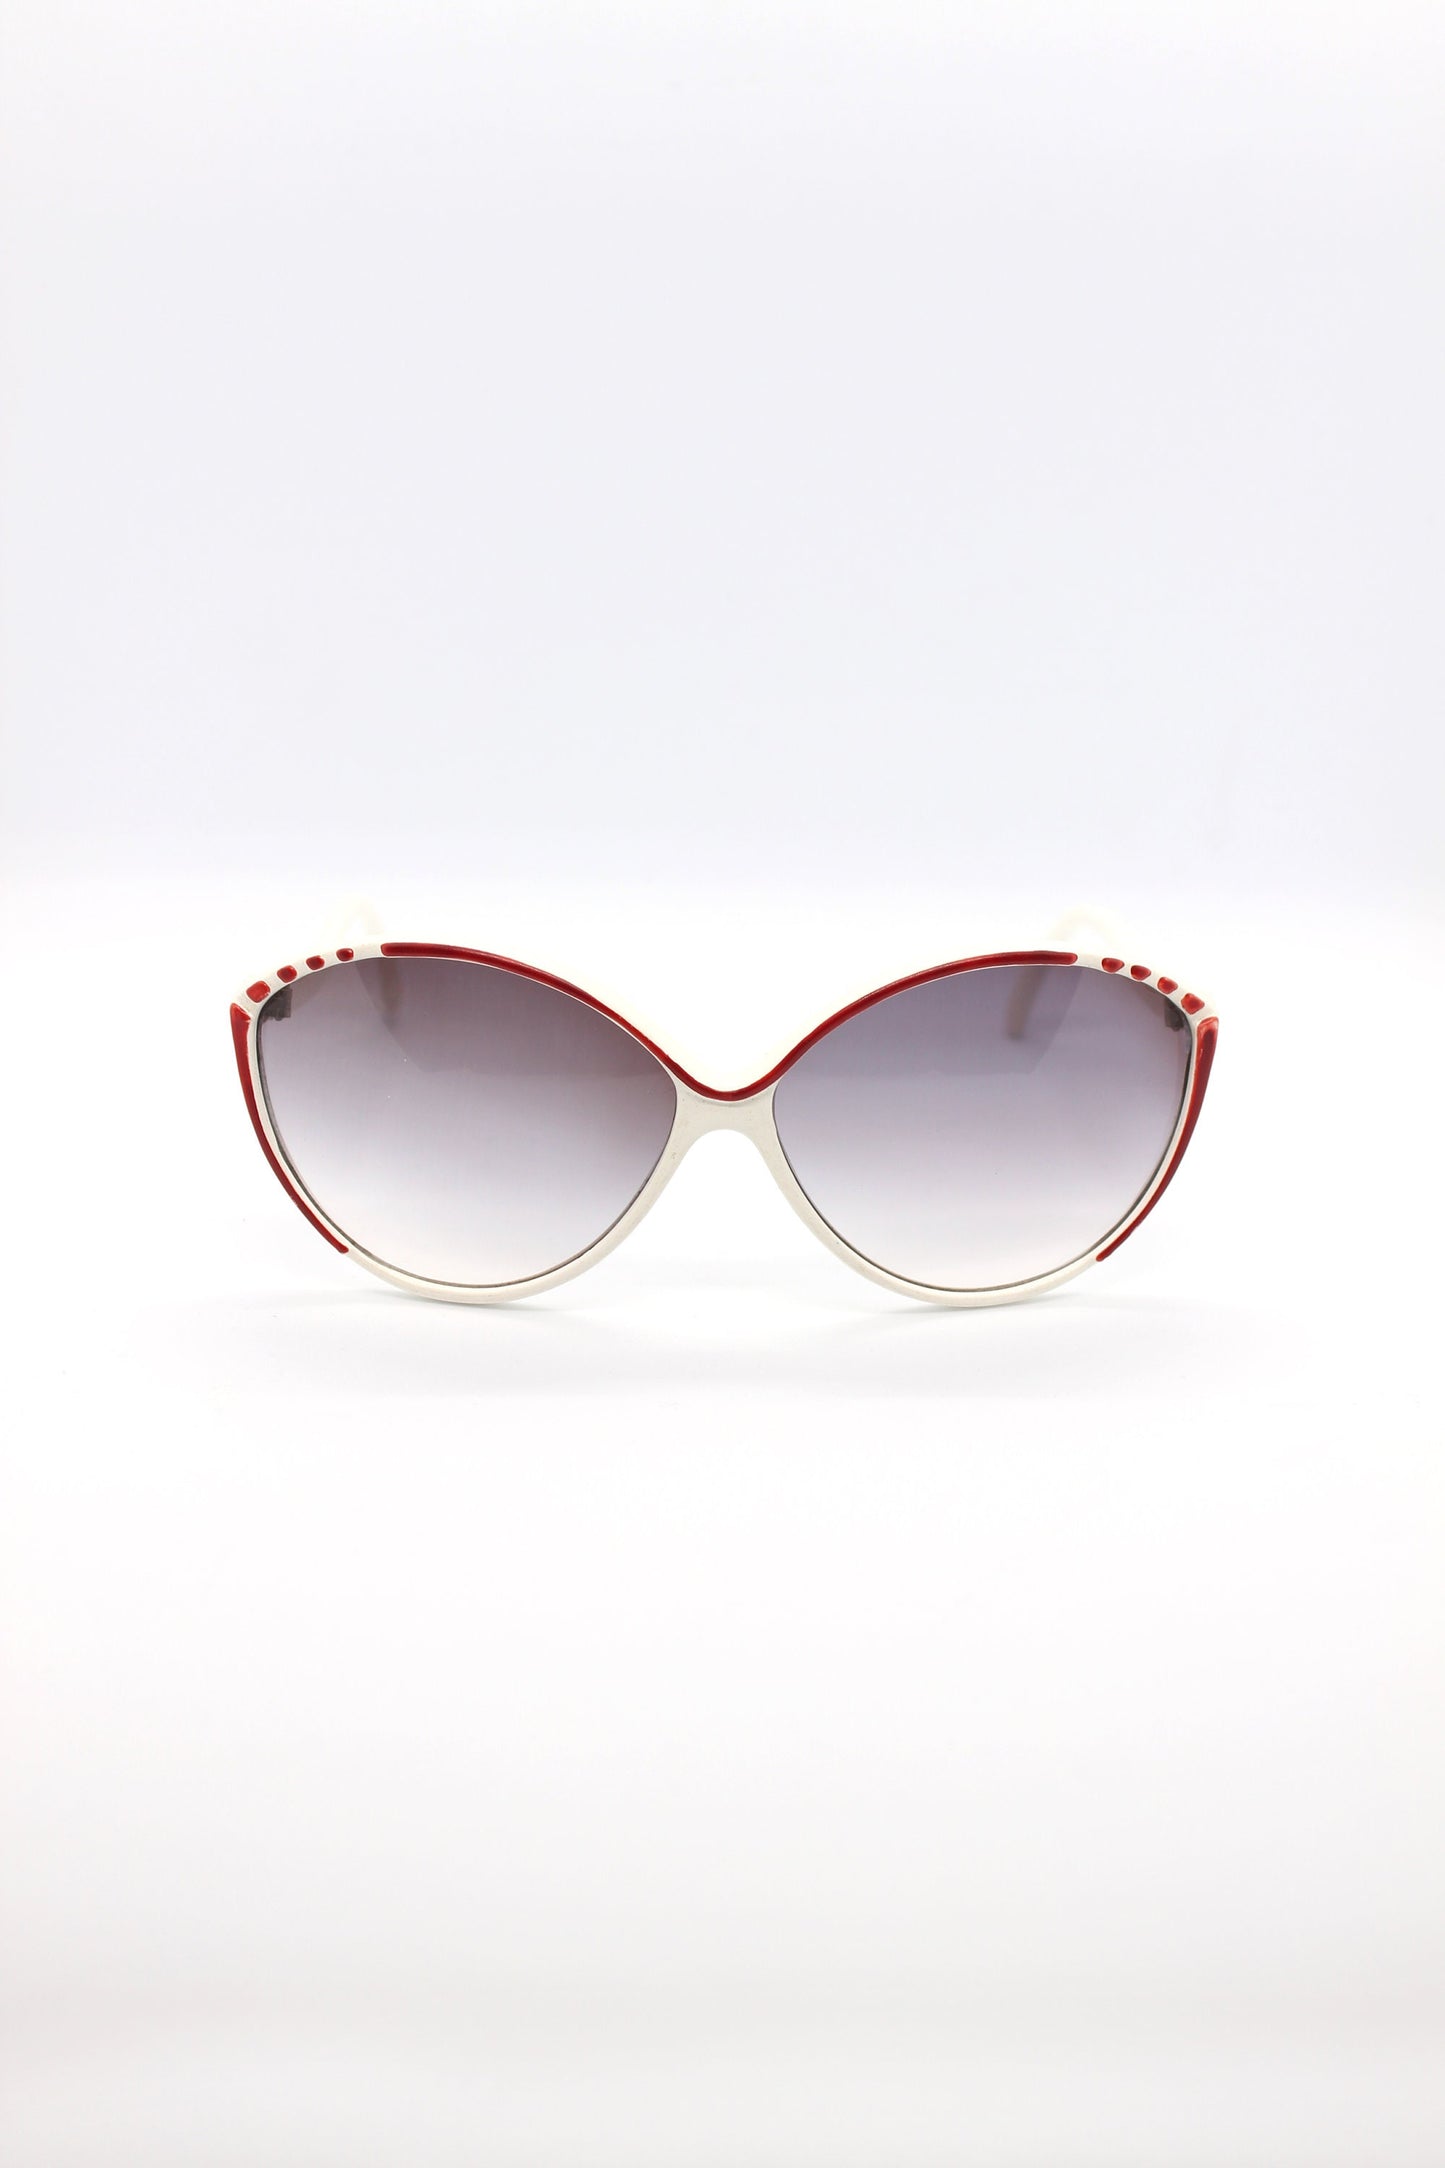 WHITE VINTAGE SUNGLASSES never worn. White frame with red details and grey gradient lenses